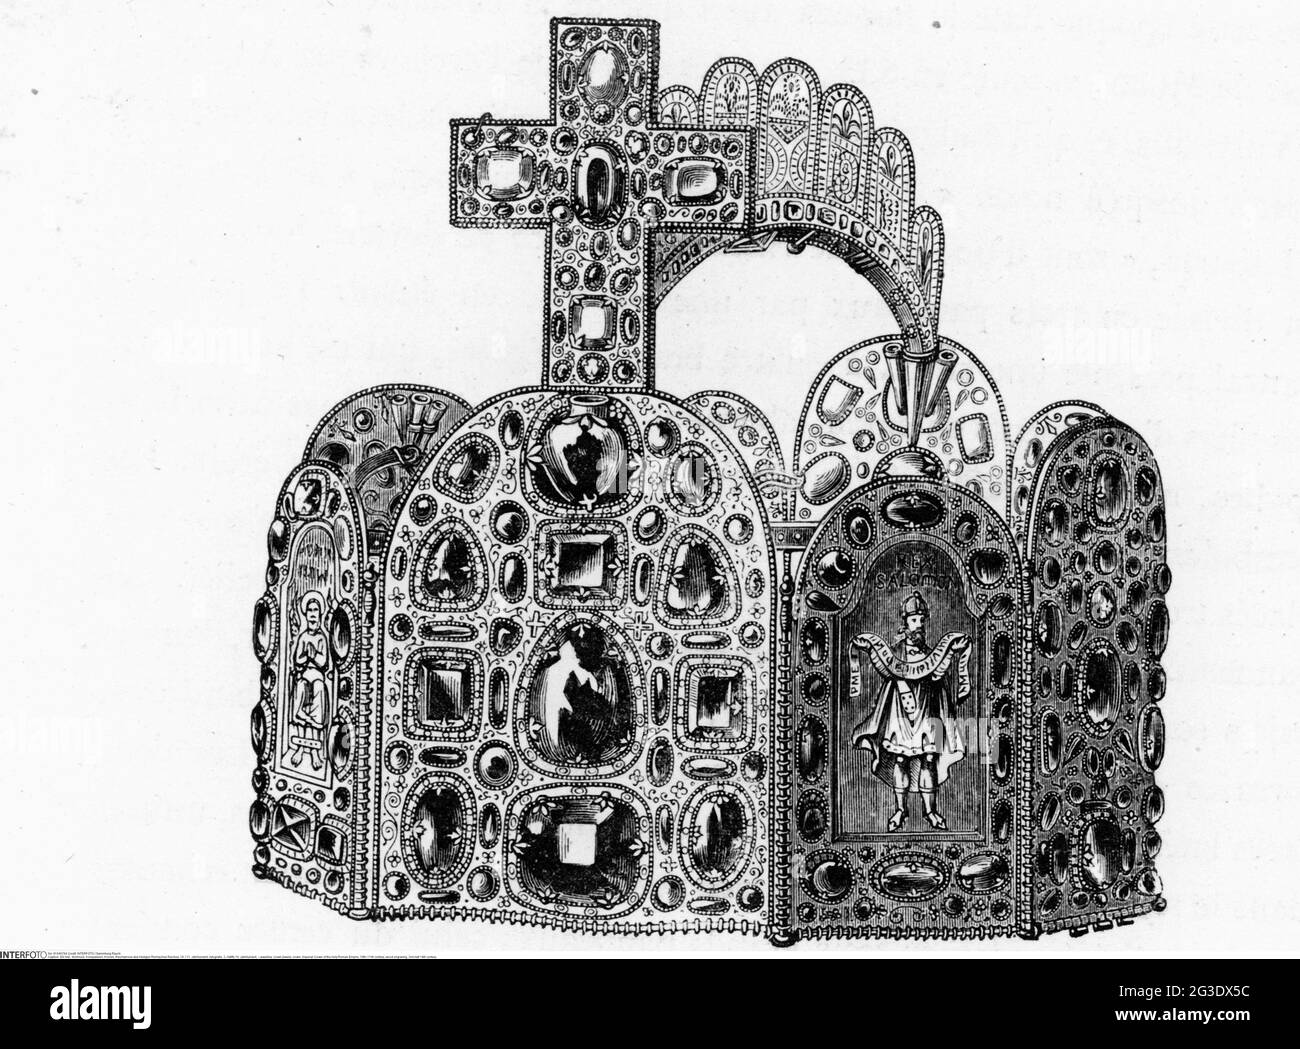 jewellery, crown jewels, crown, Imperial Crown of the Holy Roman Empire, 10th / 11th century, ARTIST'S COPYRIGHT HAS NOT TO BE CLEARED Stock Photo